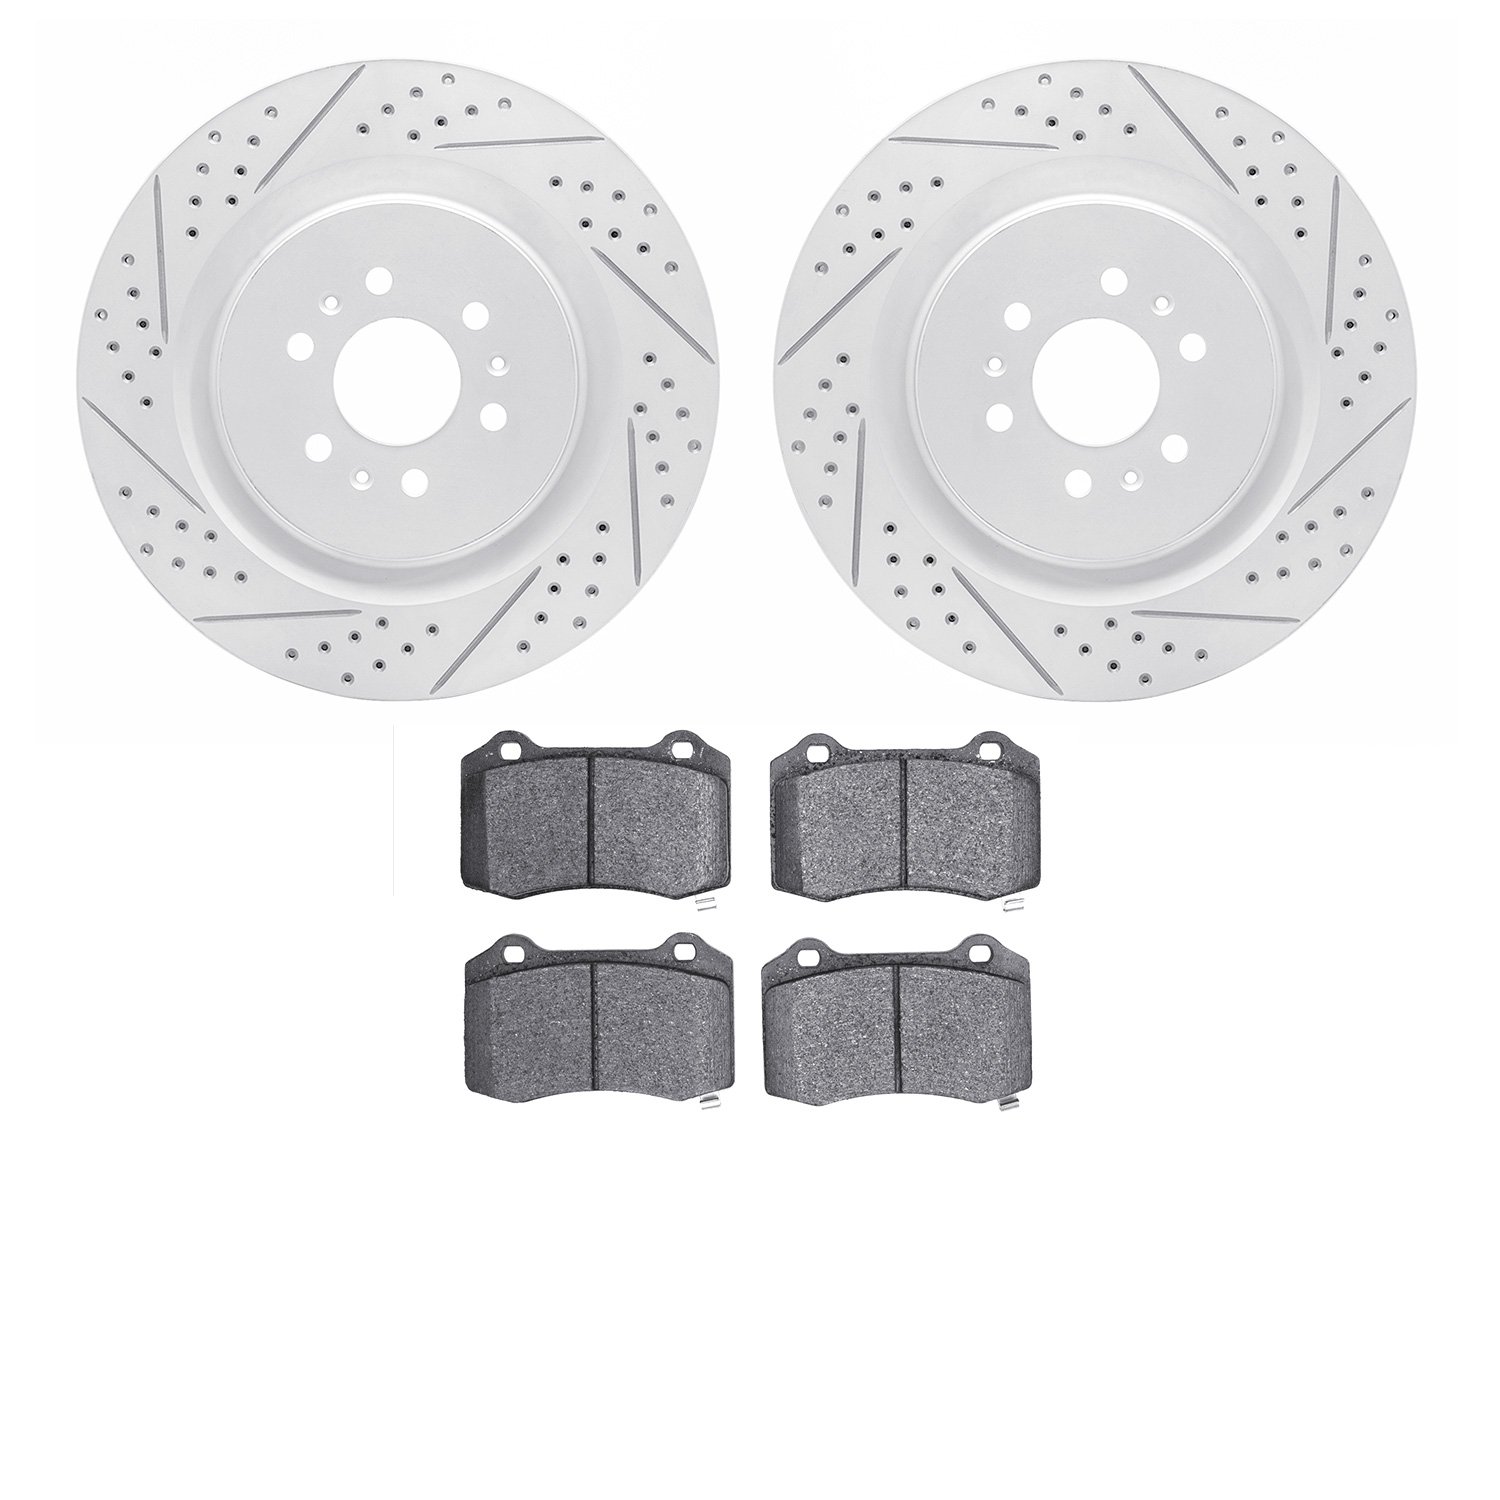 2502-46011 Geoperformance Drilled/Slotted Rotors w/5000 Advanced Brake Pads Kit, 2004-2011 GM, Position: Rear